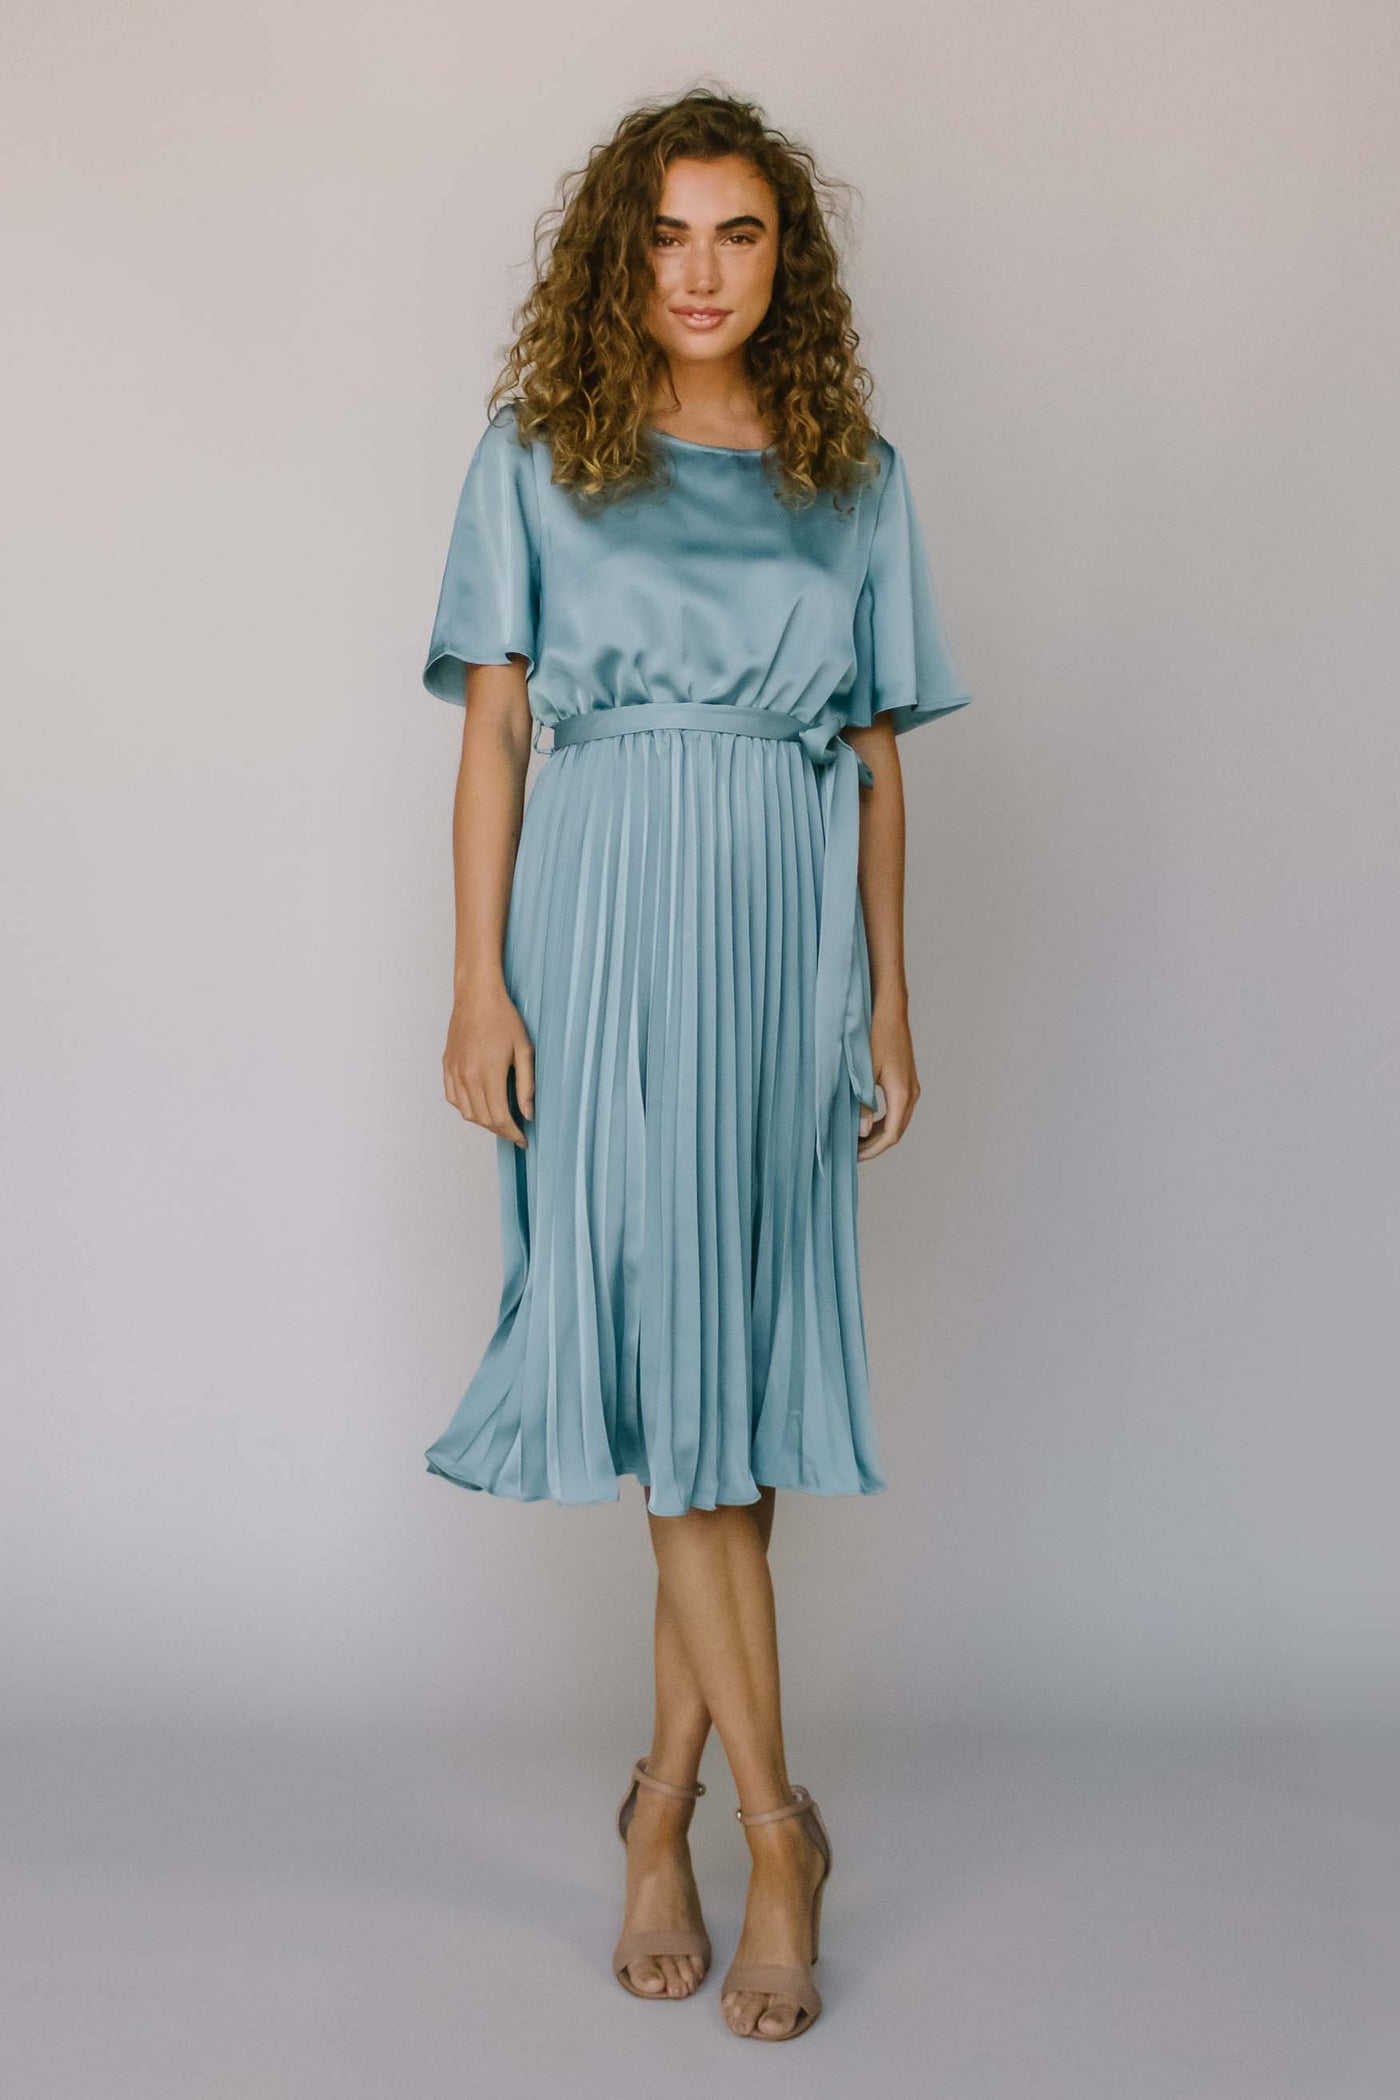 A modest dress in a silky blue fabric with flutter sleeves, a high neckline, a pleated skirt, and a defined waist with a bow.